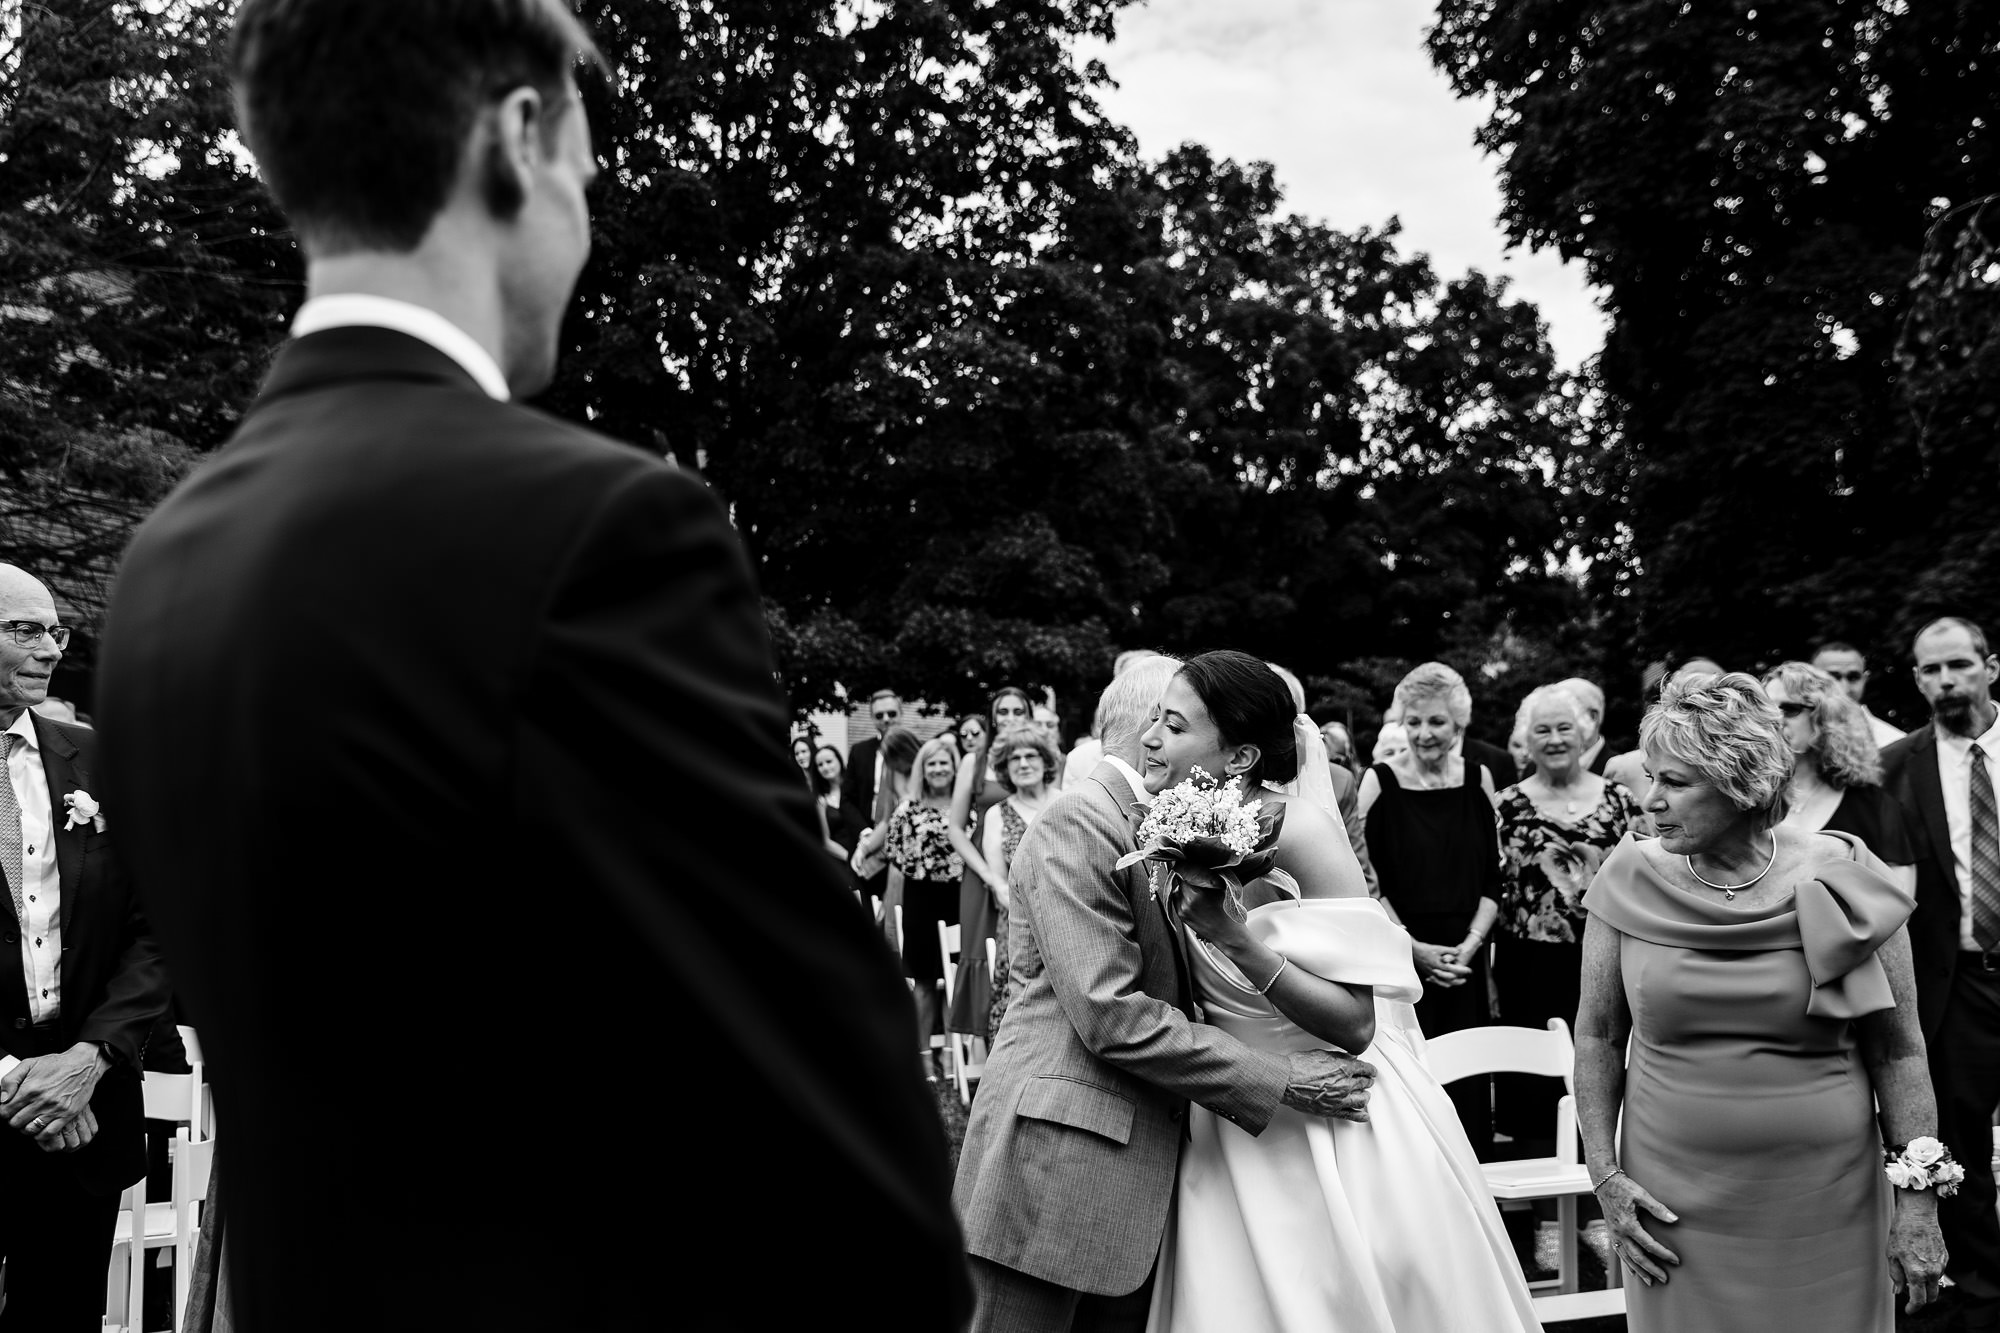 A beautiful wedding ceremony at Strawbery Banke Museum in Portsmouth, NH